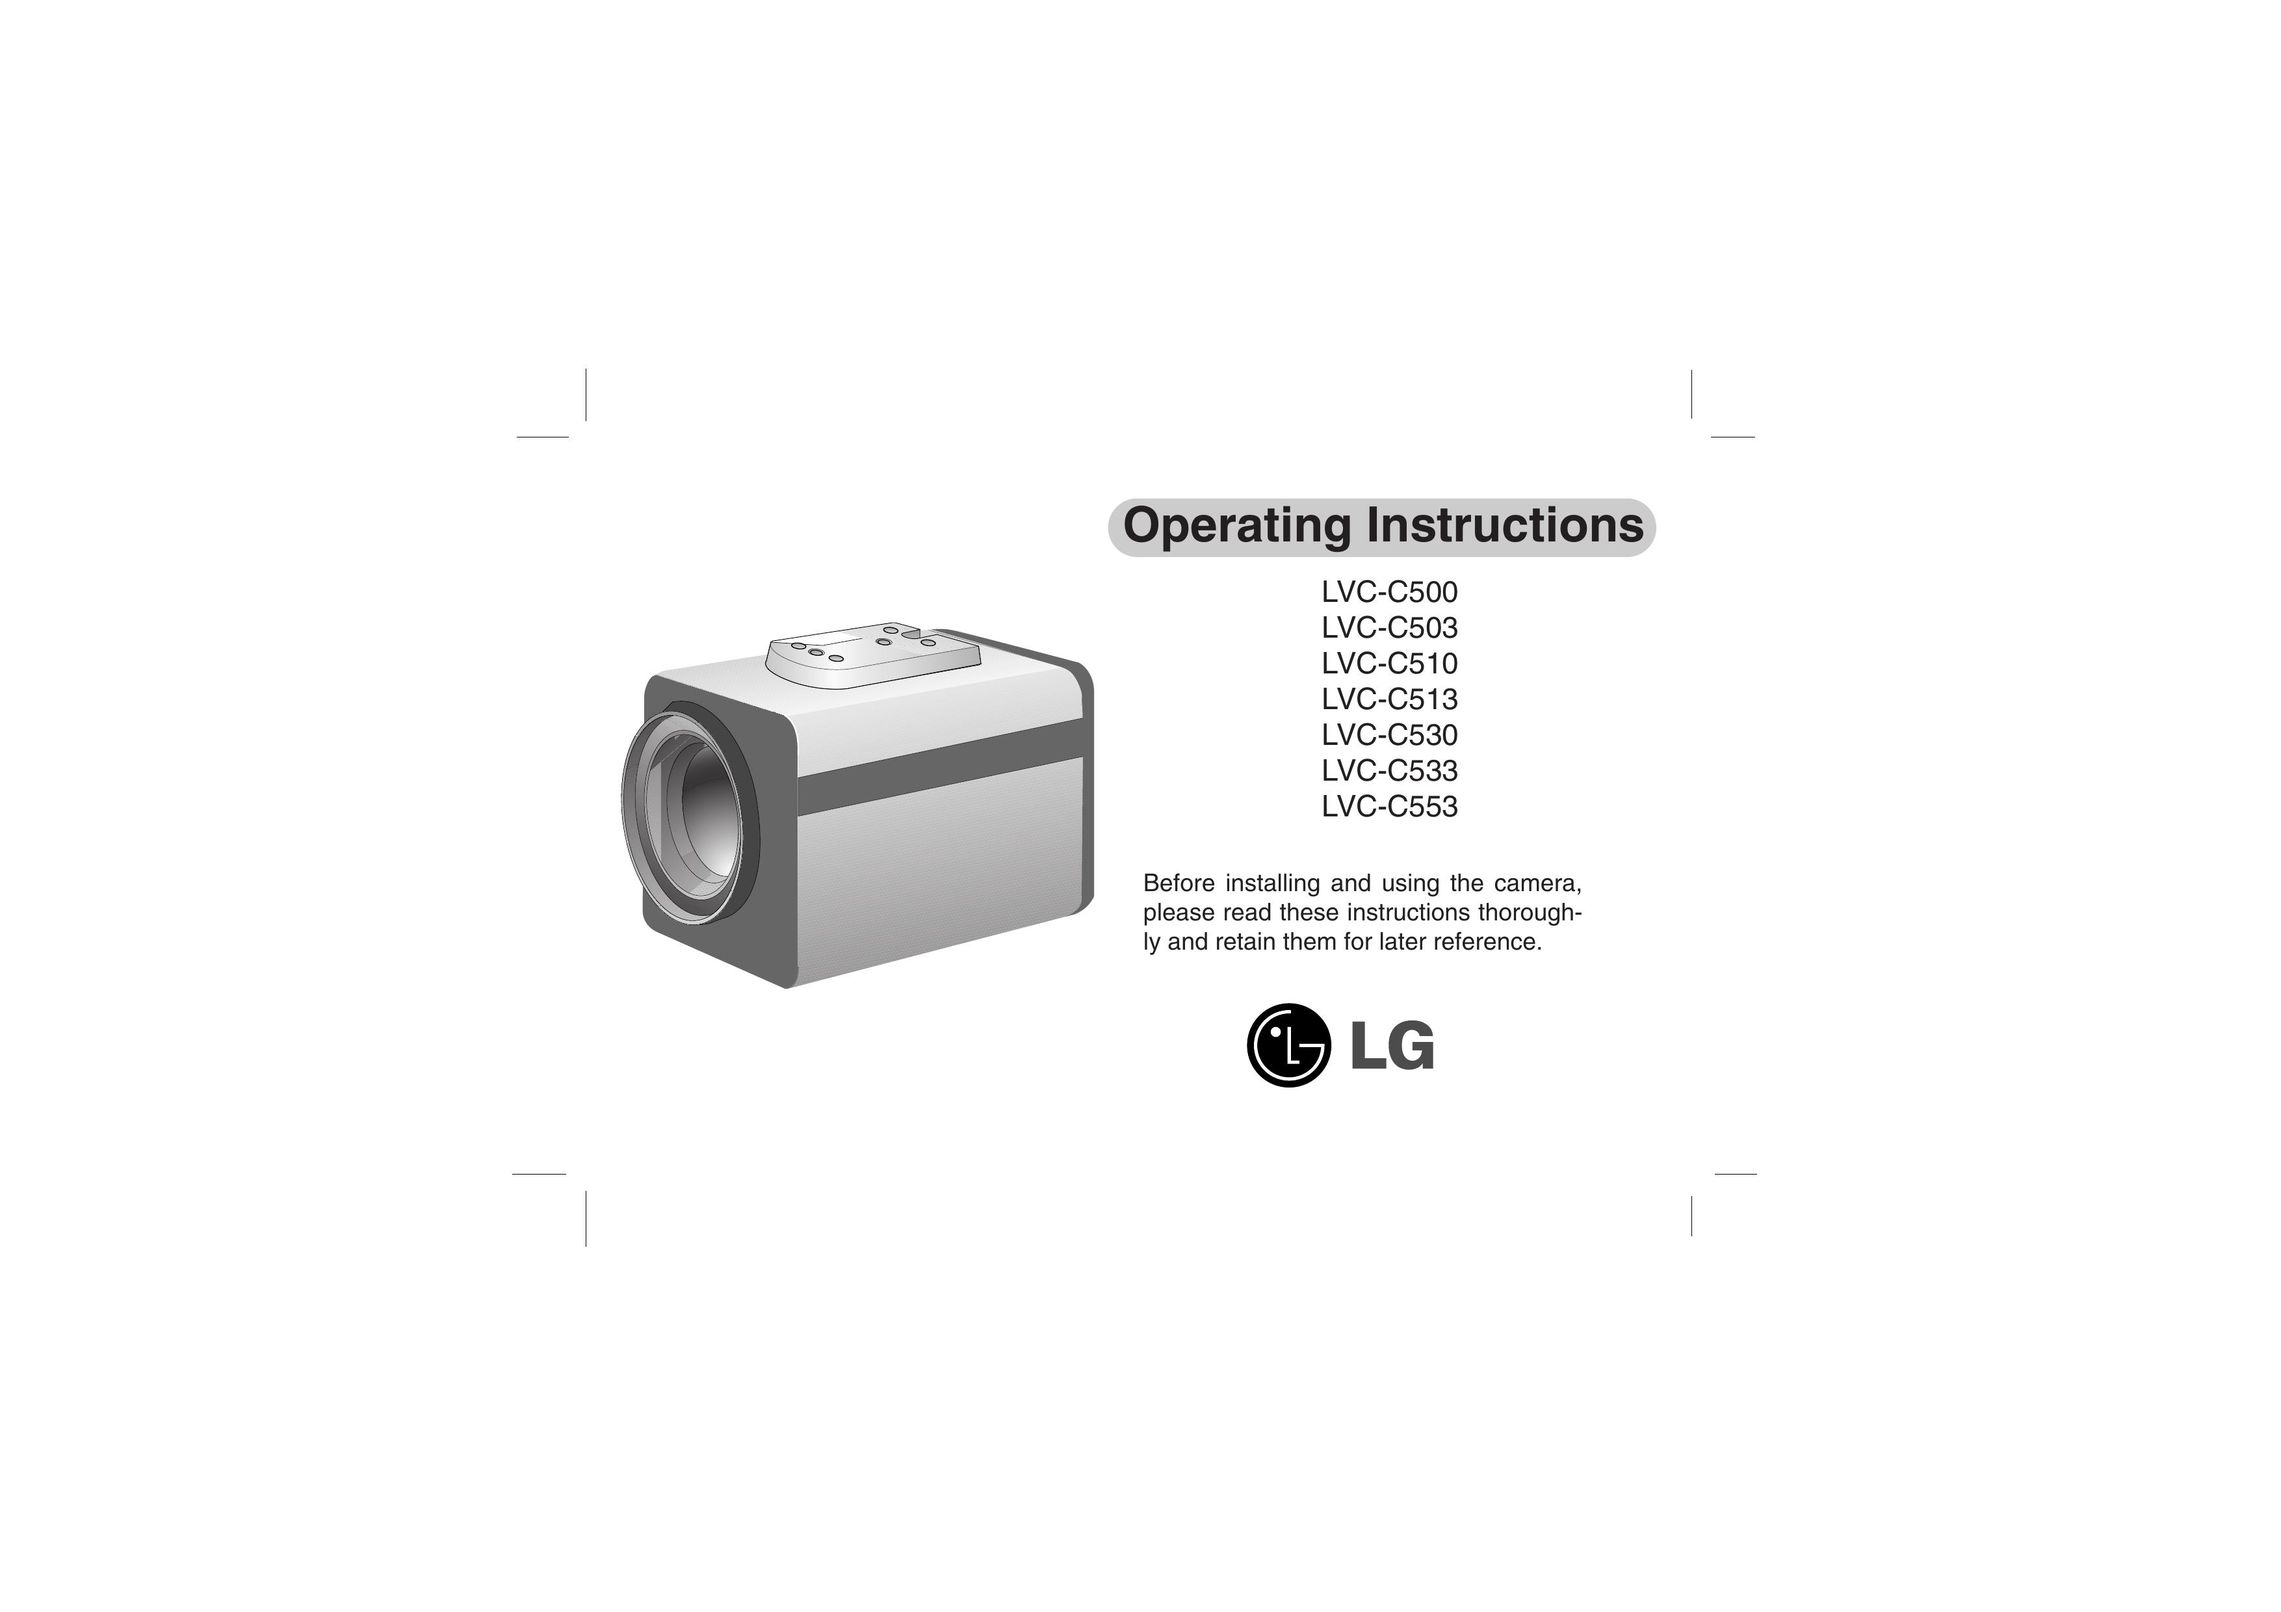 LG Electronics LVC-C530 Home Security System User Manual